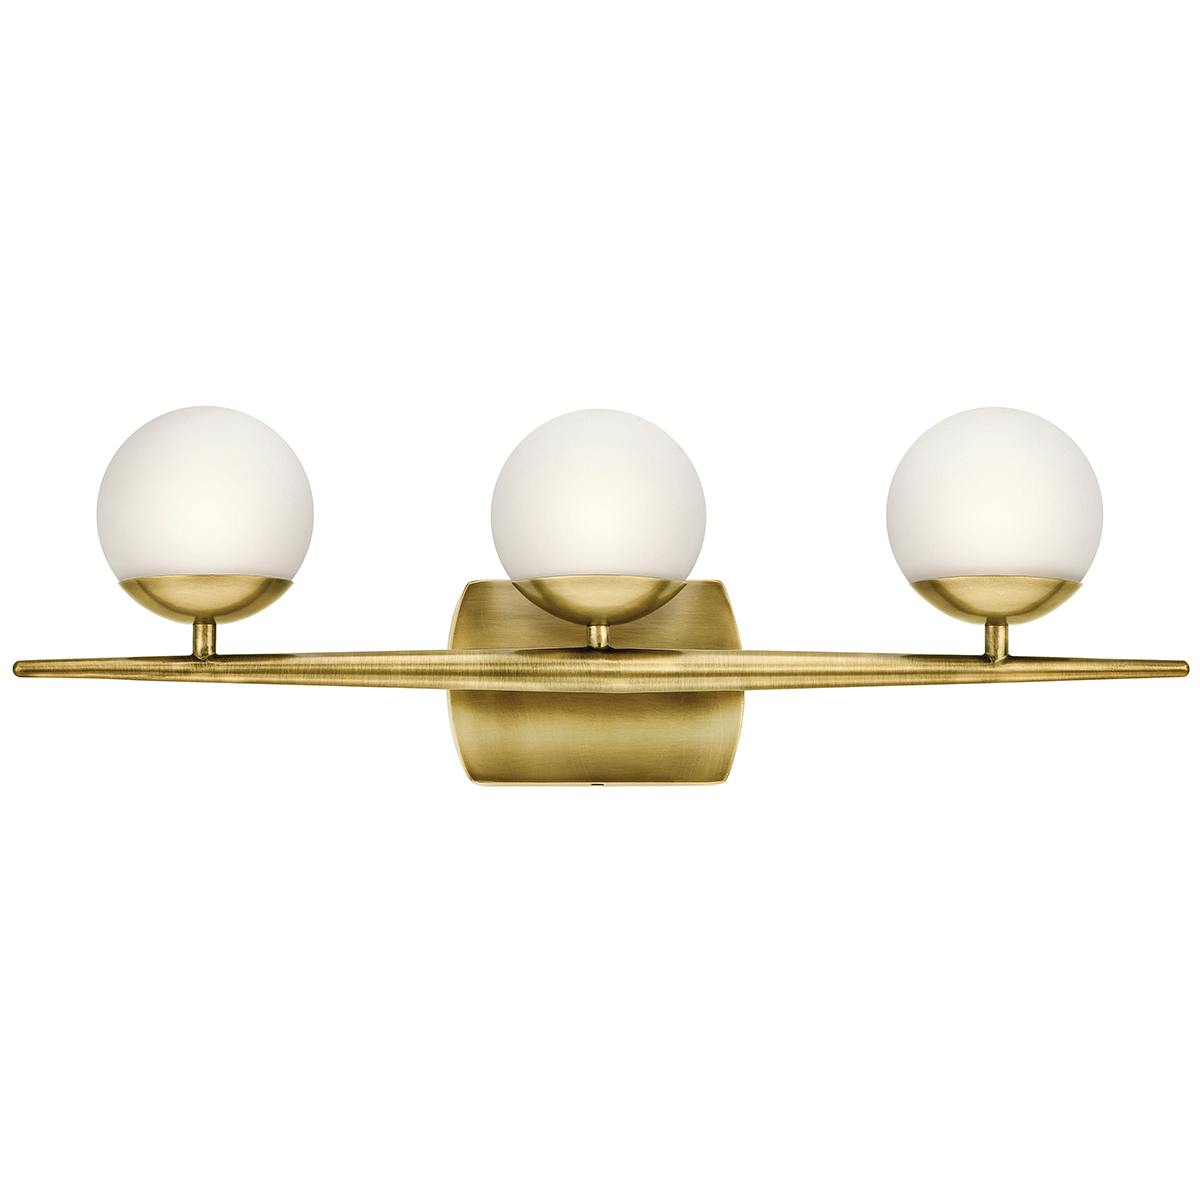 Front view of the Jasper 24.5" Halogen Vanity Light Brass on a white background